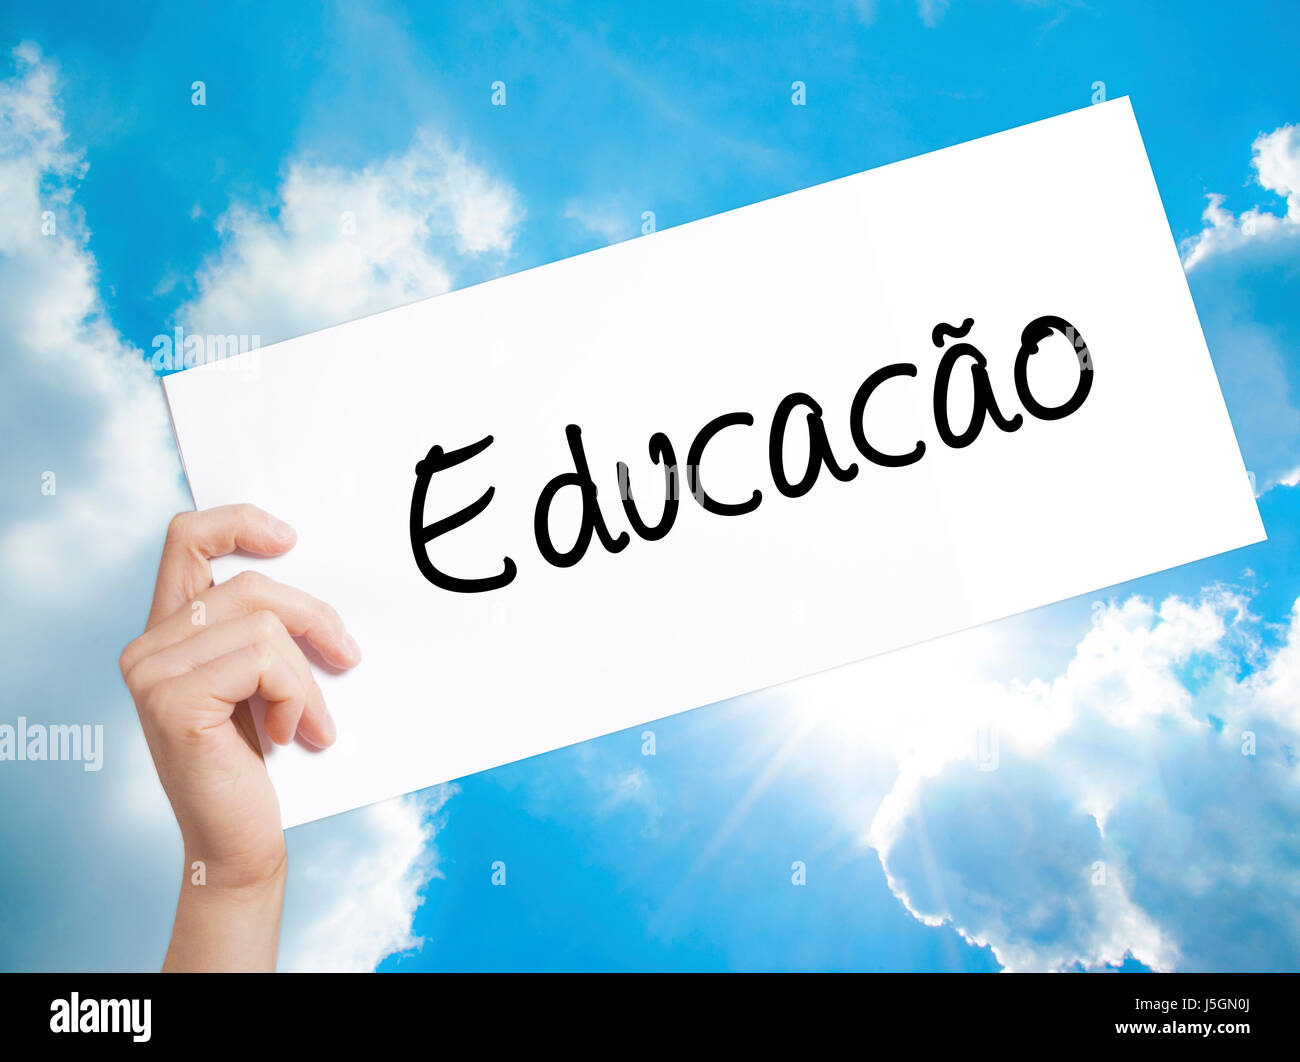 Education (Educacao in Portuguese) Sign on white paper. Man Hand Holding Paper with text. Isolated on sky background.  Business concept. Stock Photo Stock Photo